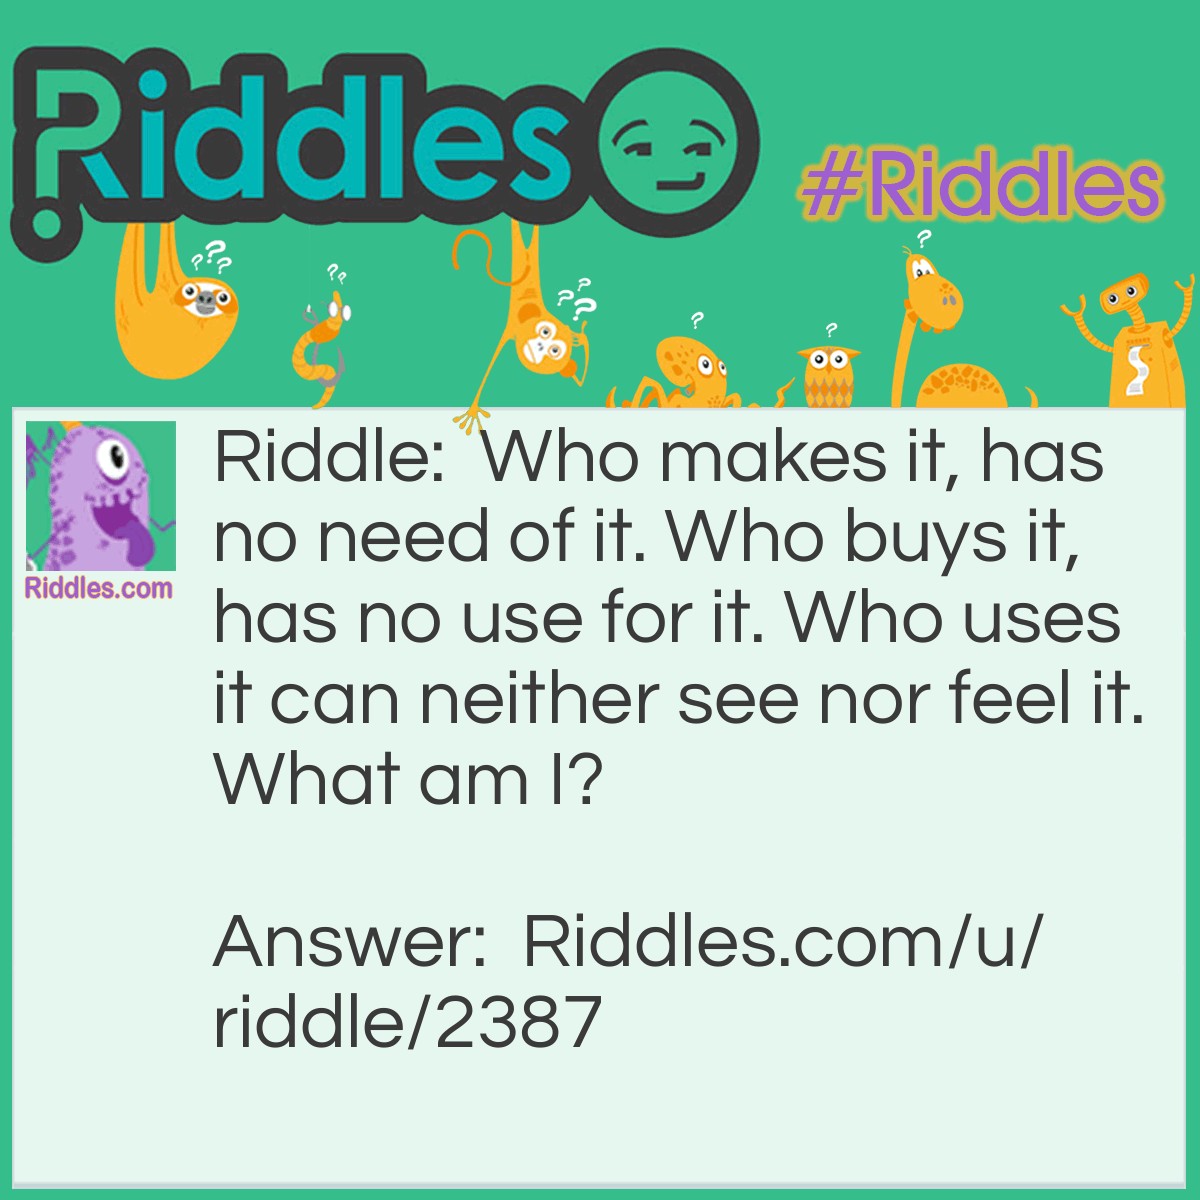 Riddle: Who makes it, has no need of it. Who buys it, has no use for it. Who uses it can neither see nor feel it. What am I? Answer: A coffin.